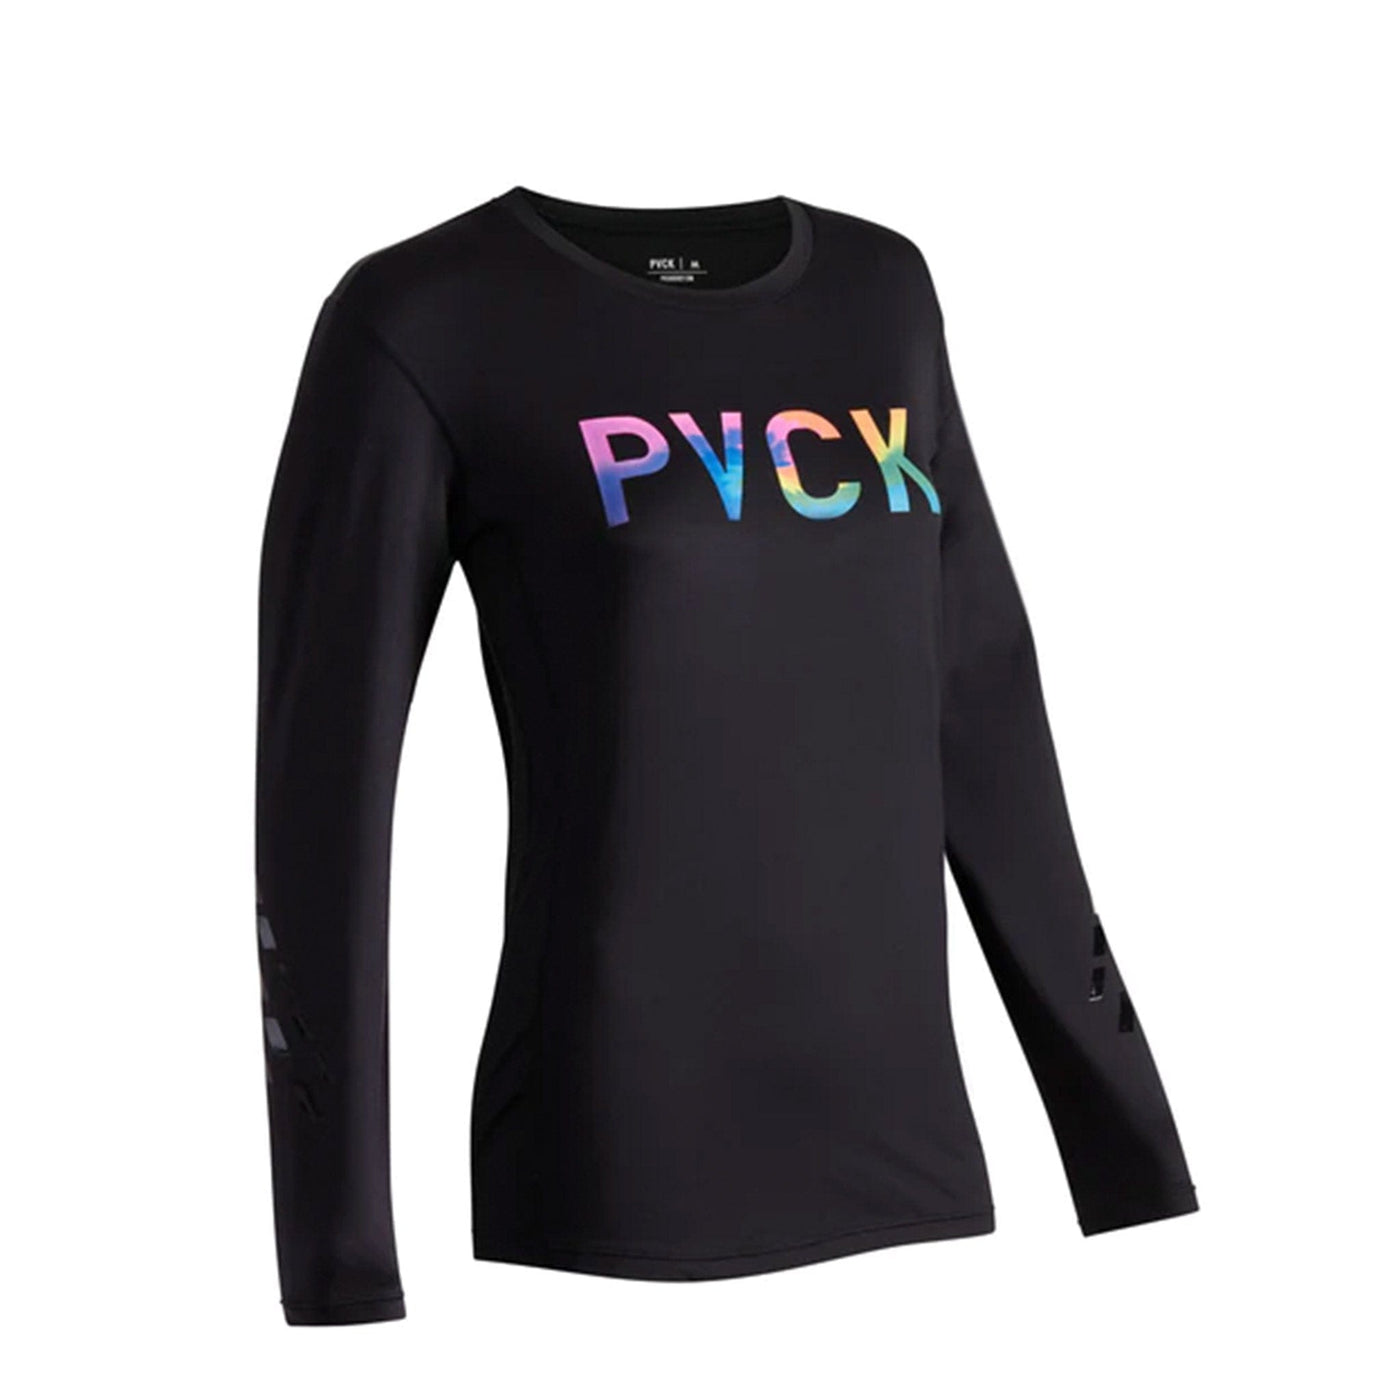 PVCK Technical Womens Baselayer Shirt - Tie Dye - The Hockey Shop Source For Sports